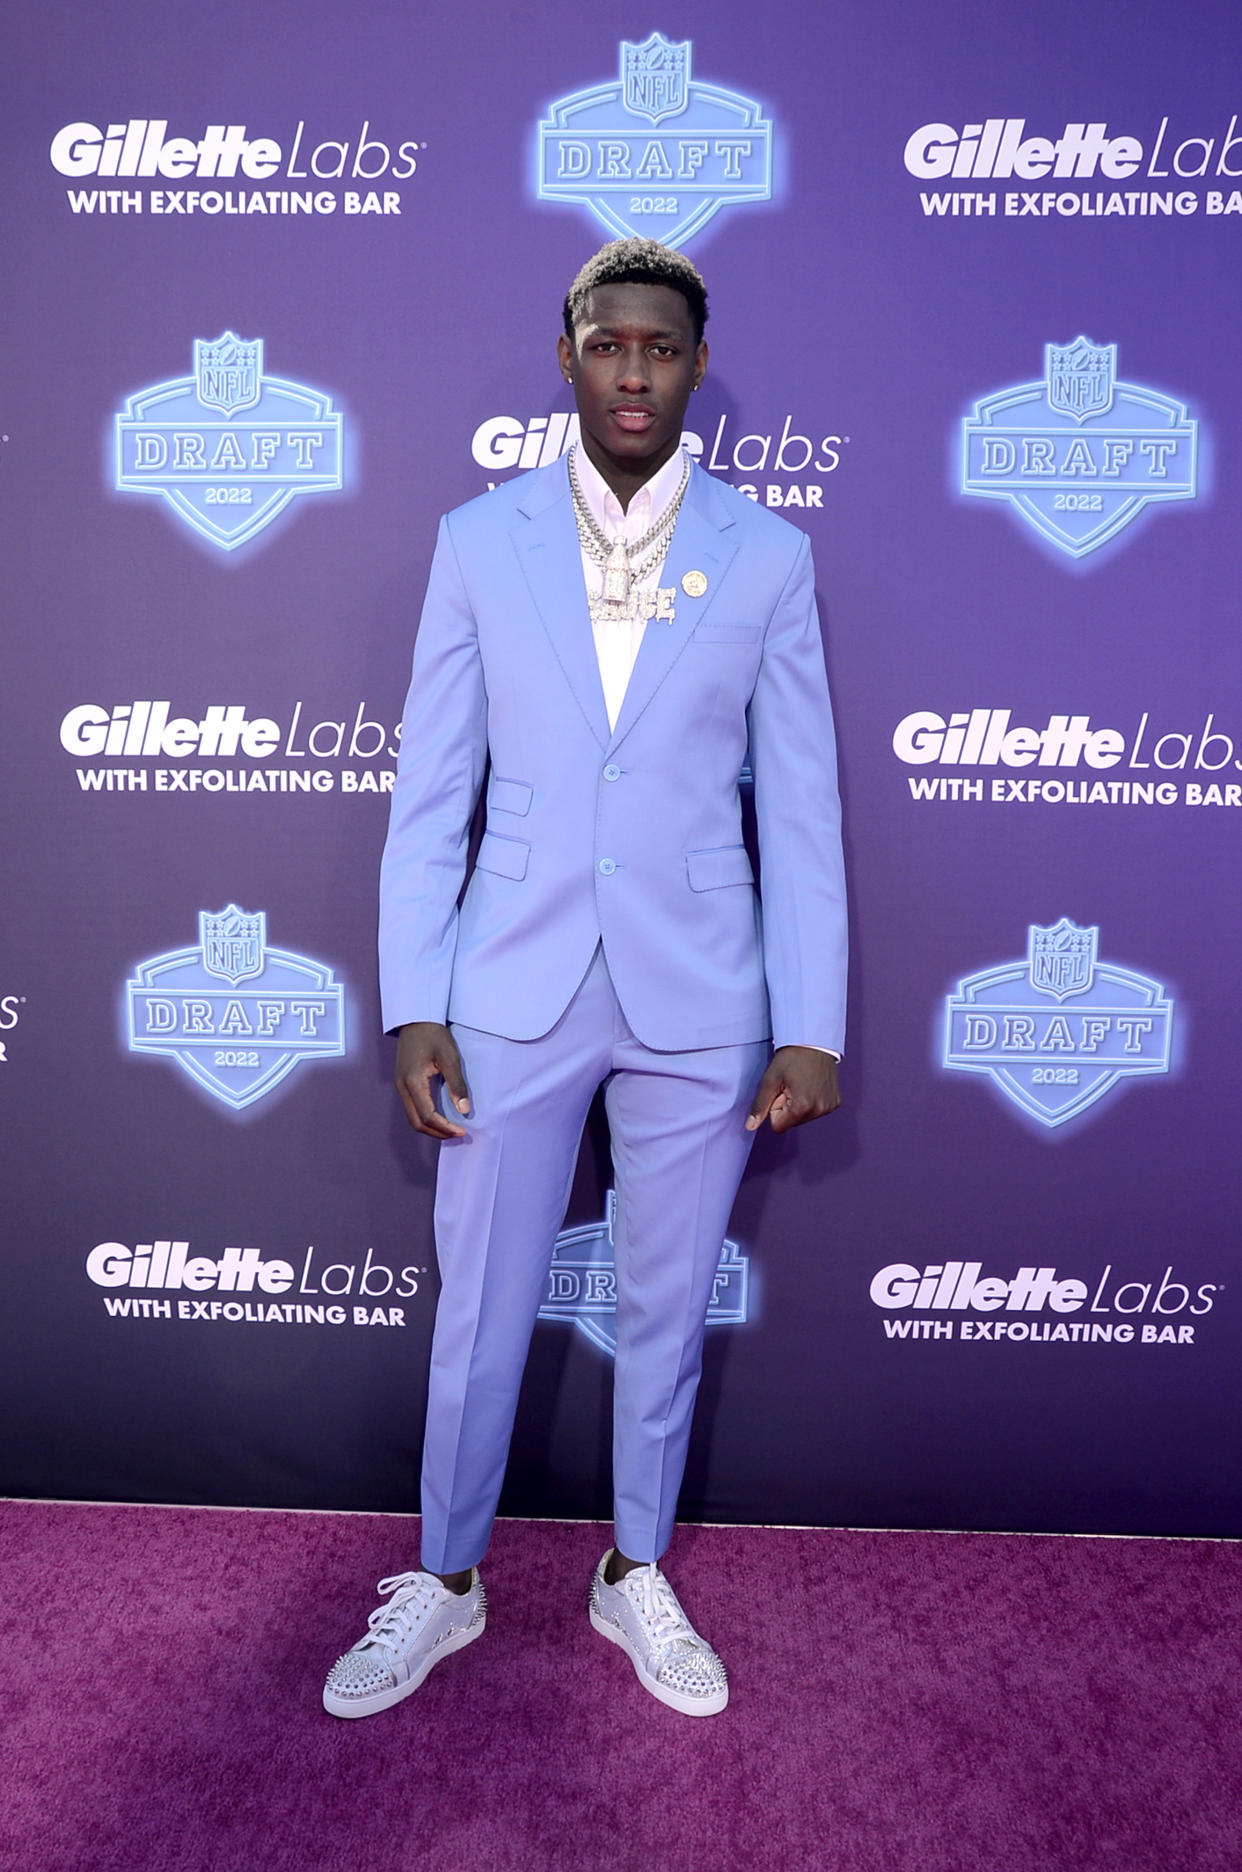 LAS VEGAS, NEVADA - APRIL 28: Sauce Gardner attends the 2022 NFL Draft on April 28, 2022 in Las Vegas, Nevada. (Photo by Mindy Small/Getty Images)